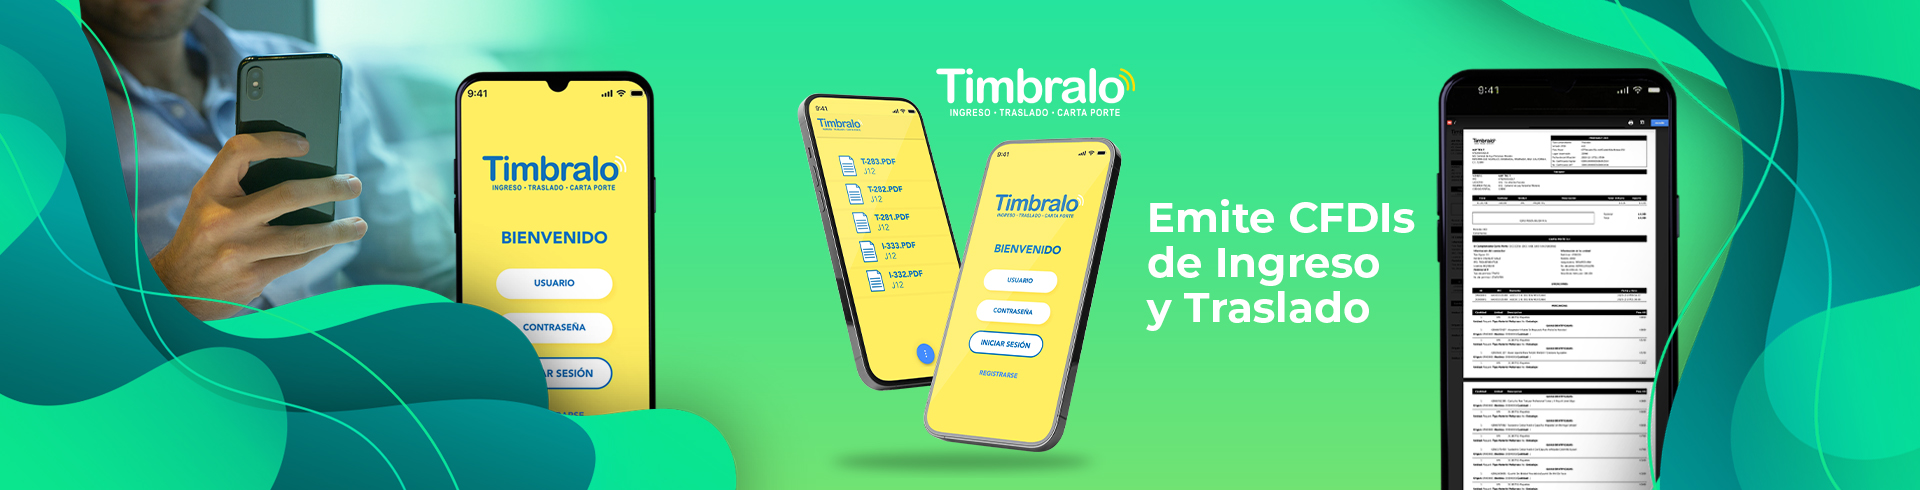 app timbralo banner2